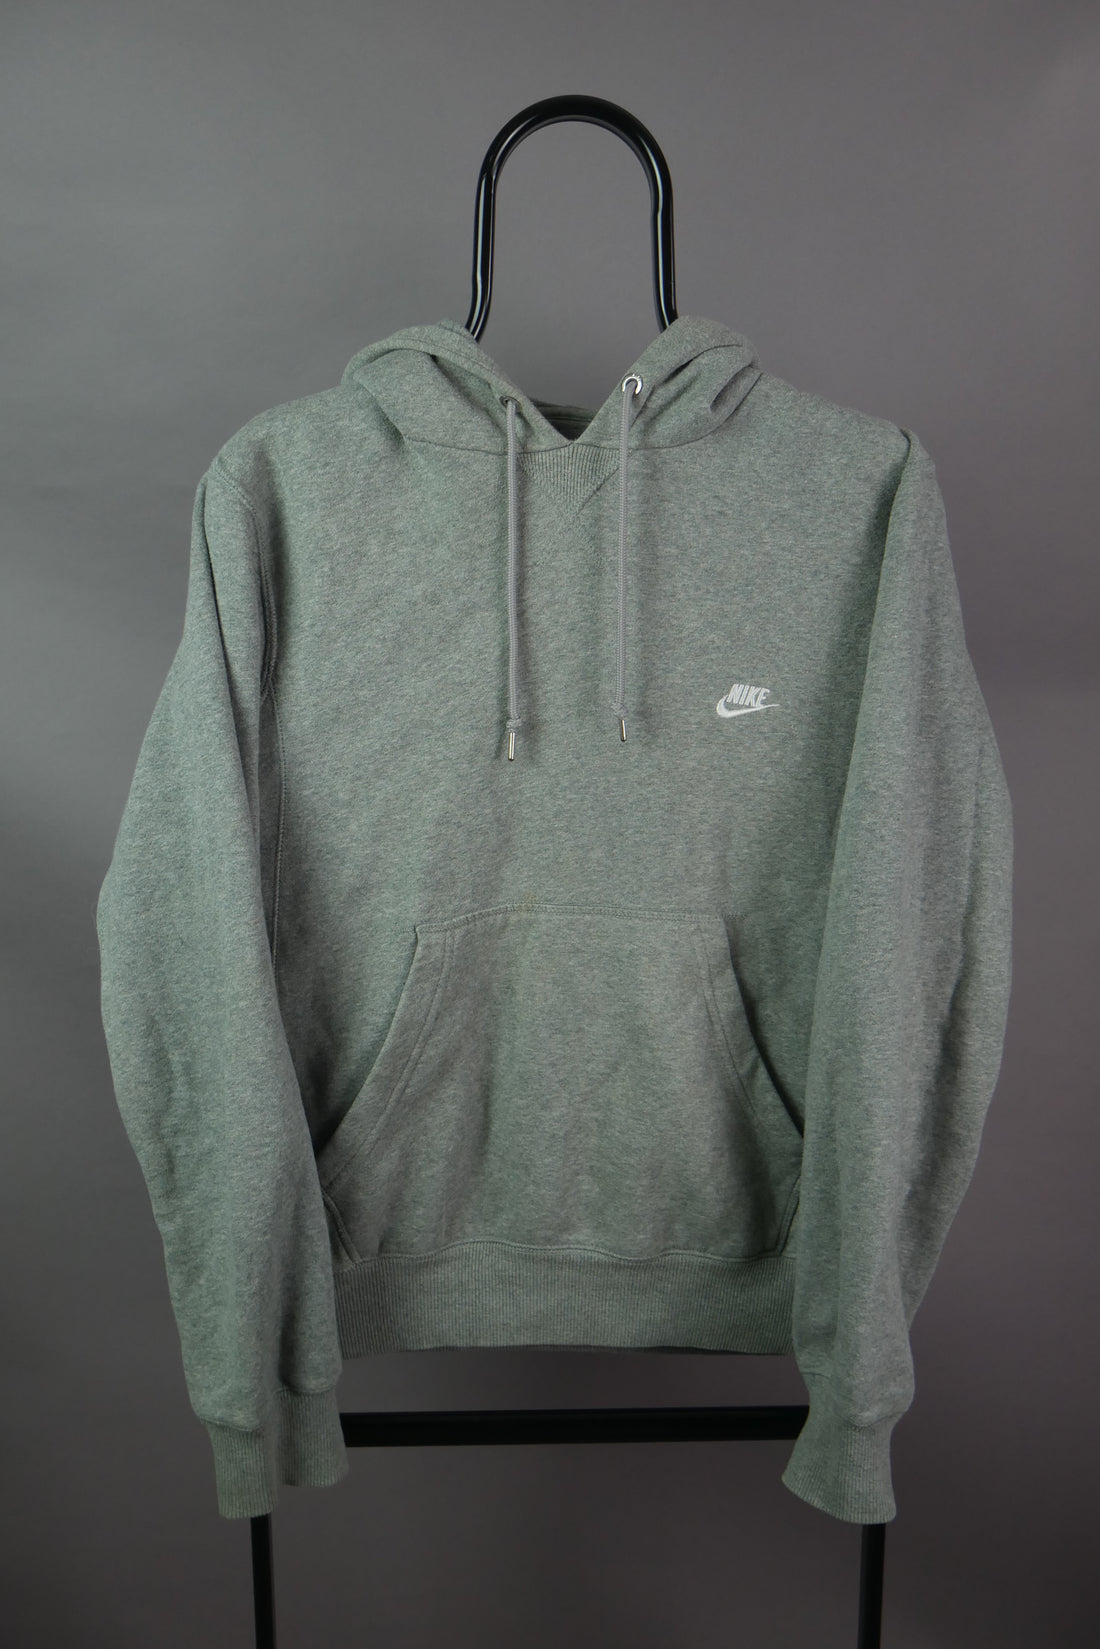 The Nike Embroidered Logo Hoodie (Womens S)